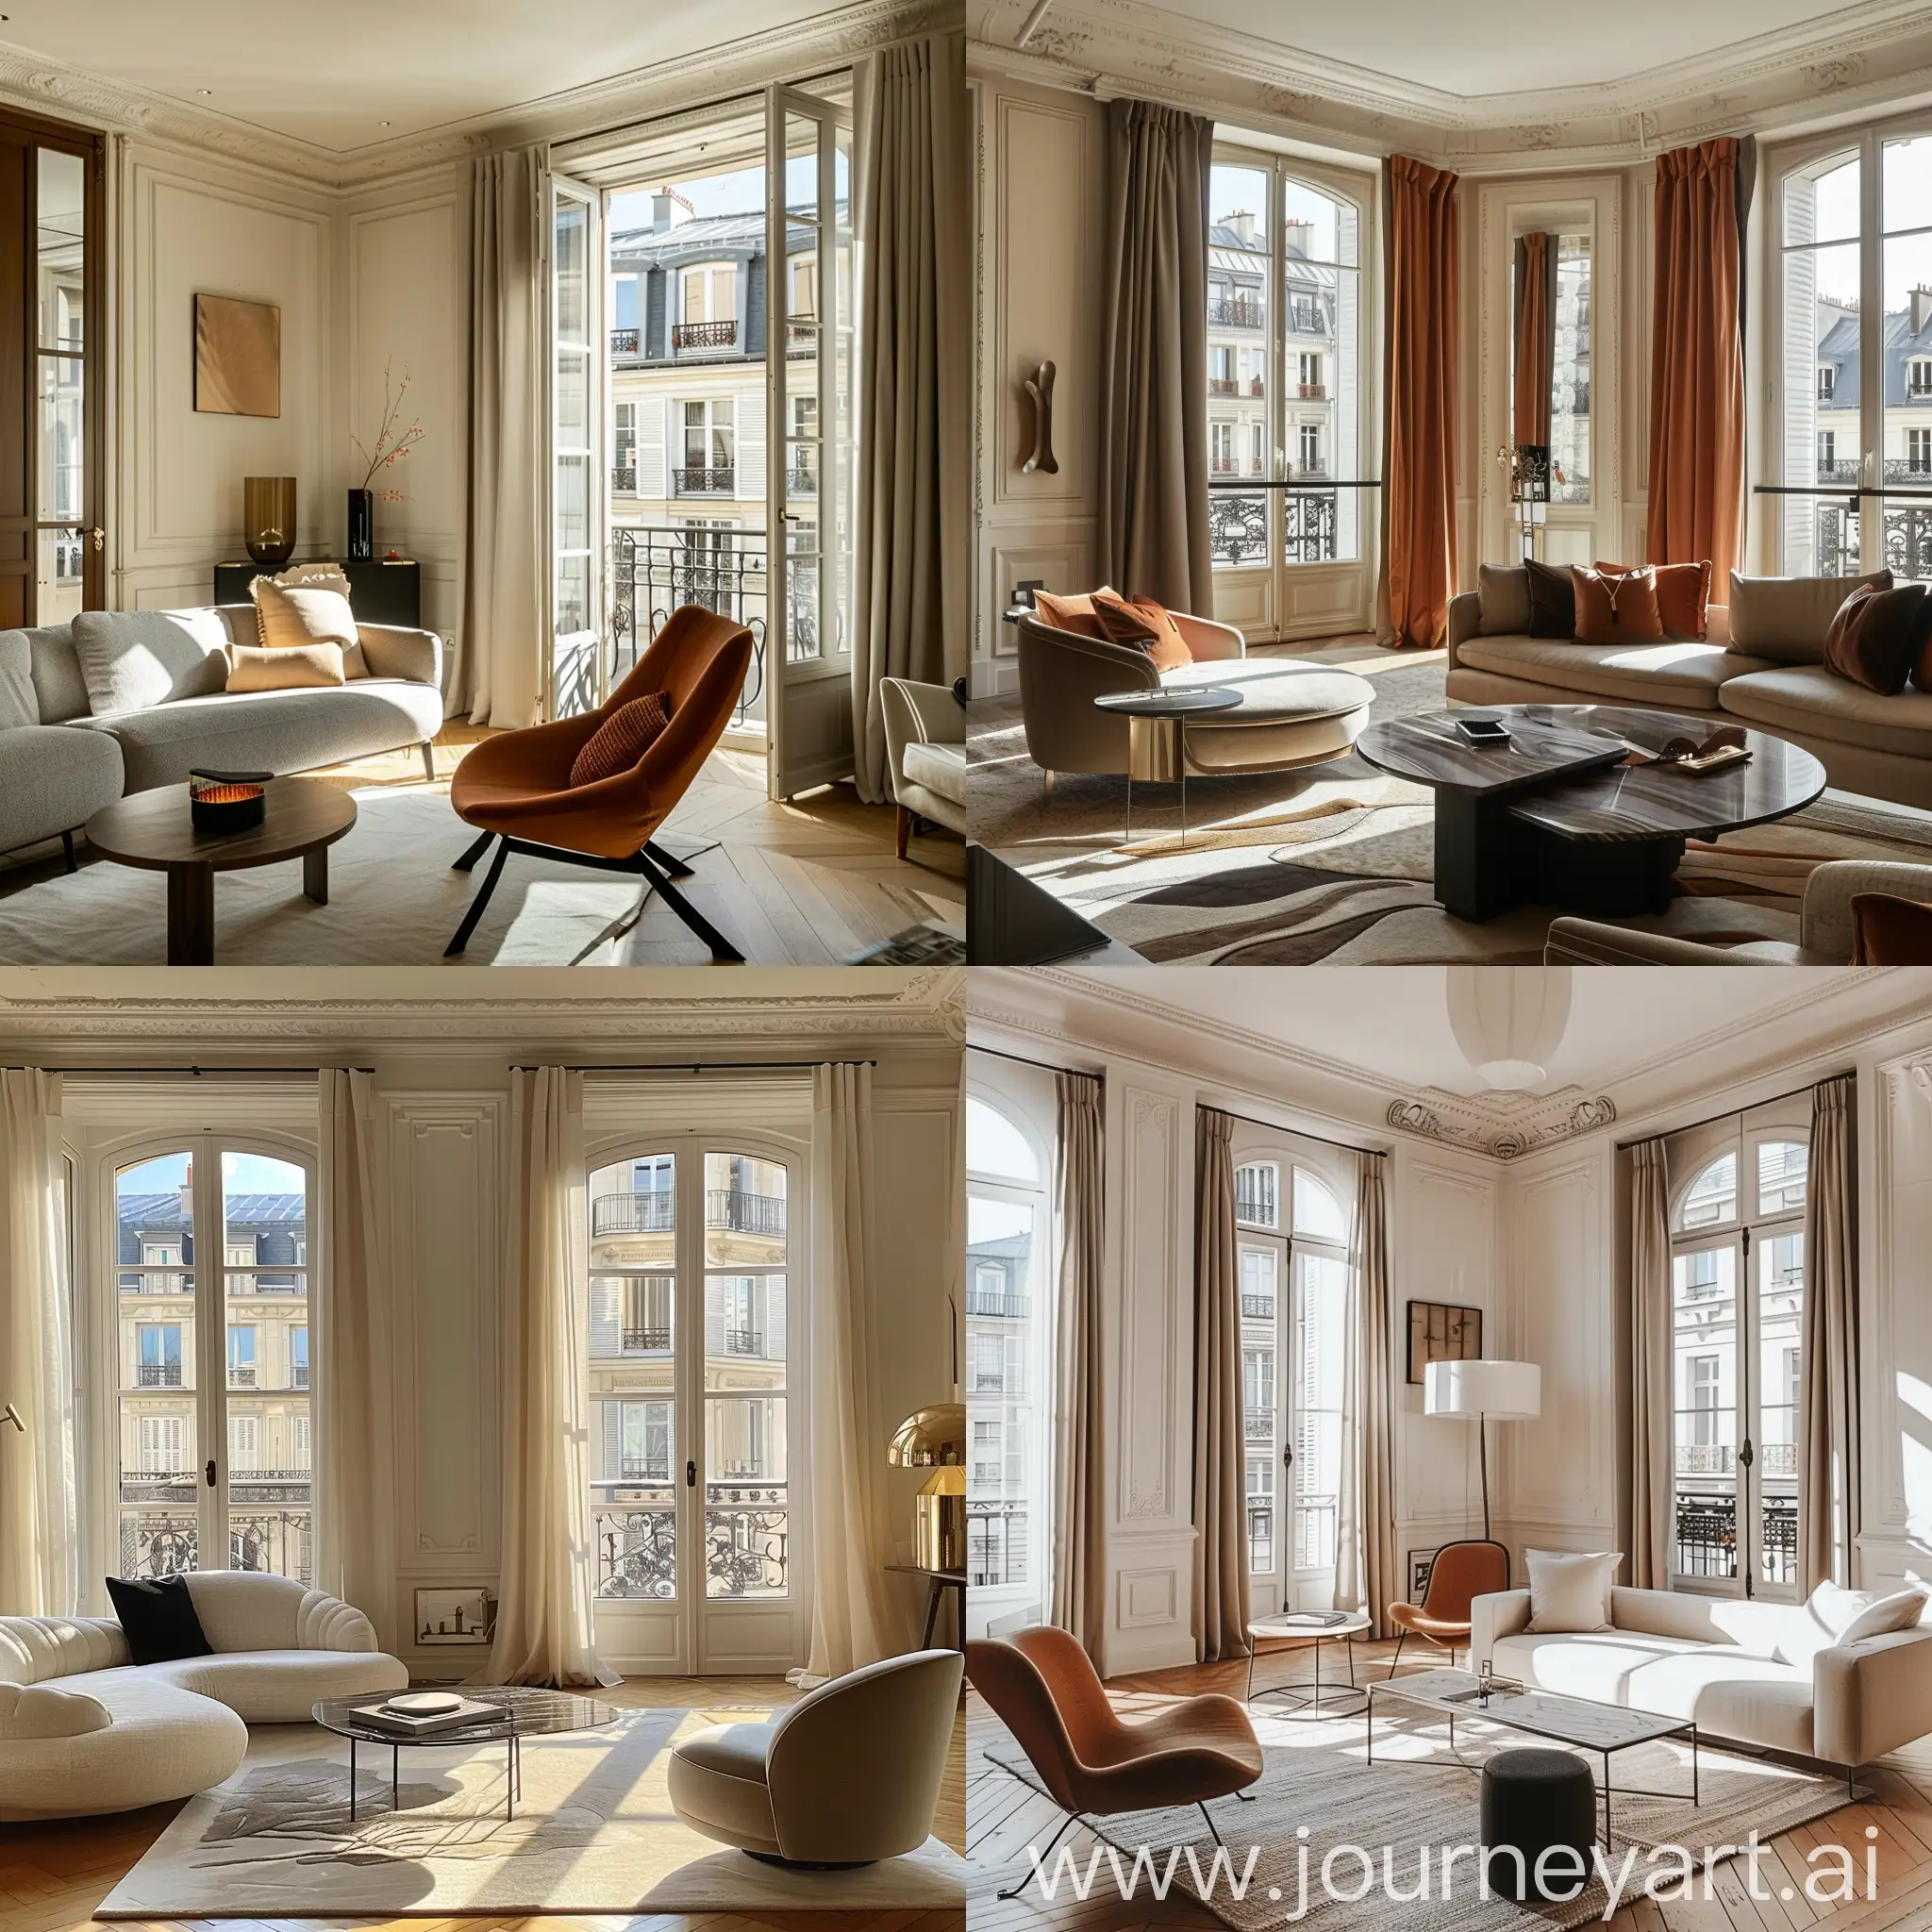 an amazing Parisian modern and chic serviced apartment with high-end furniture, filled with warm afternoon light through the windows.